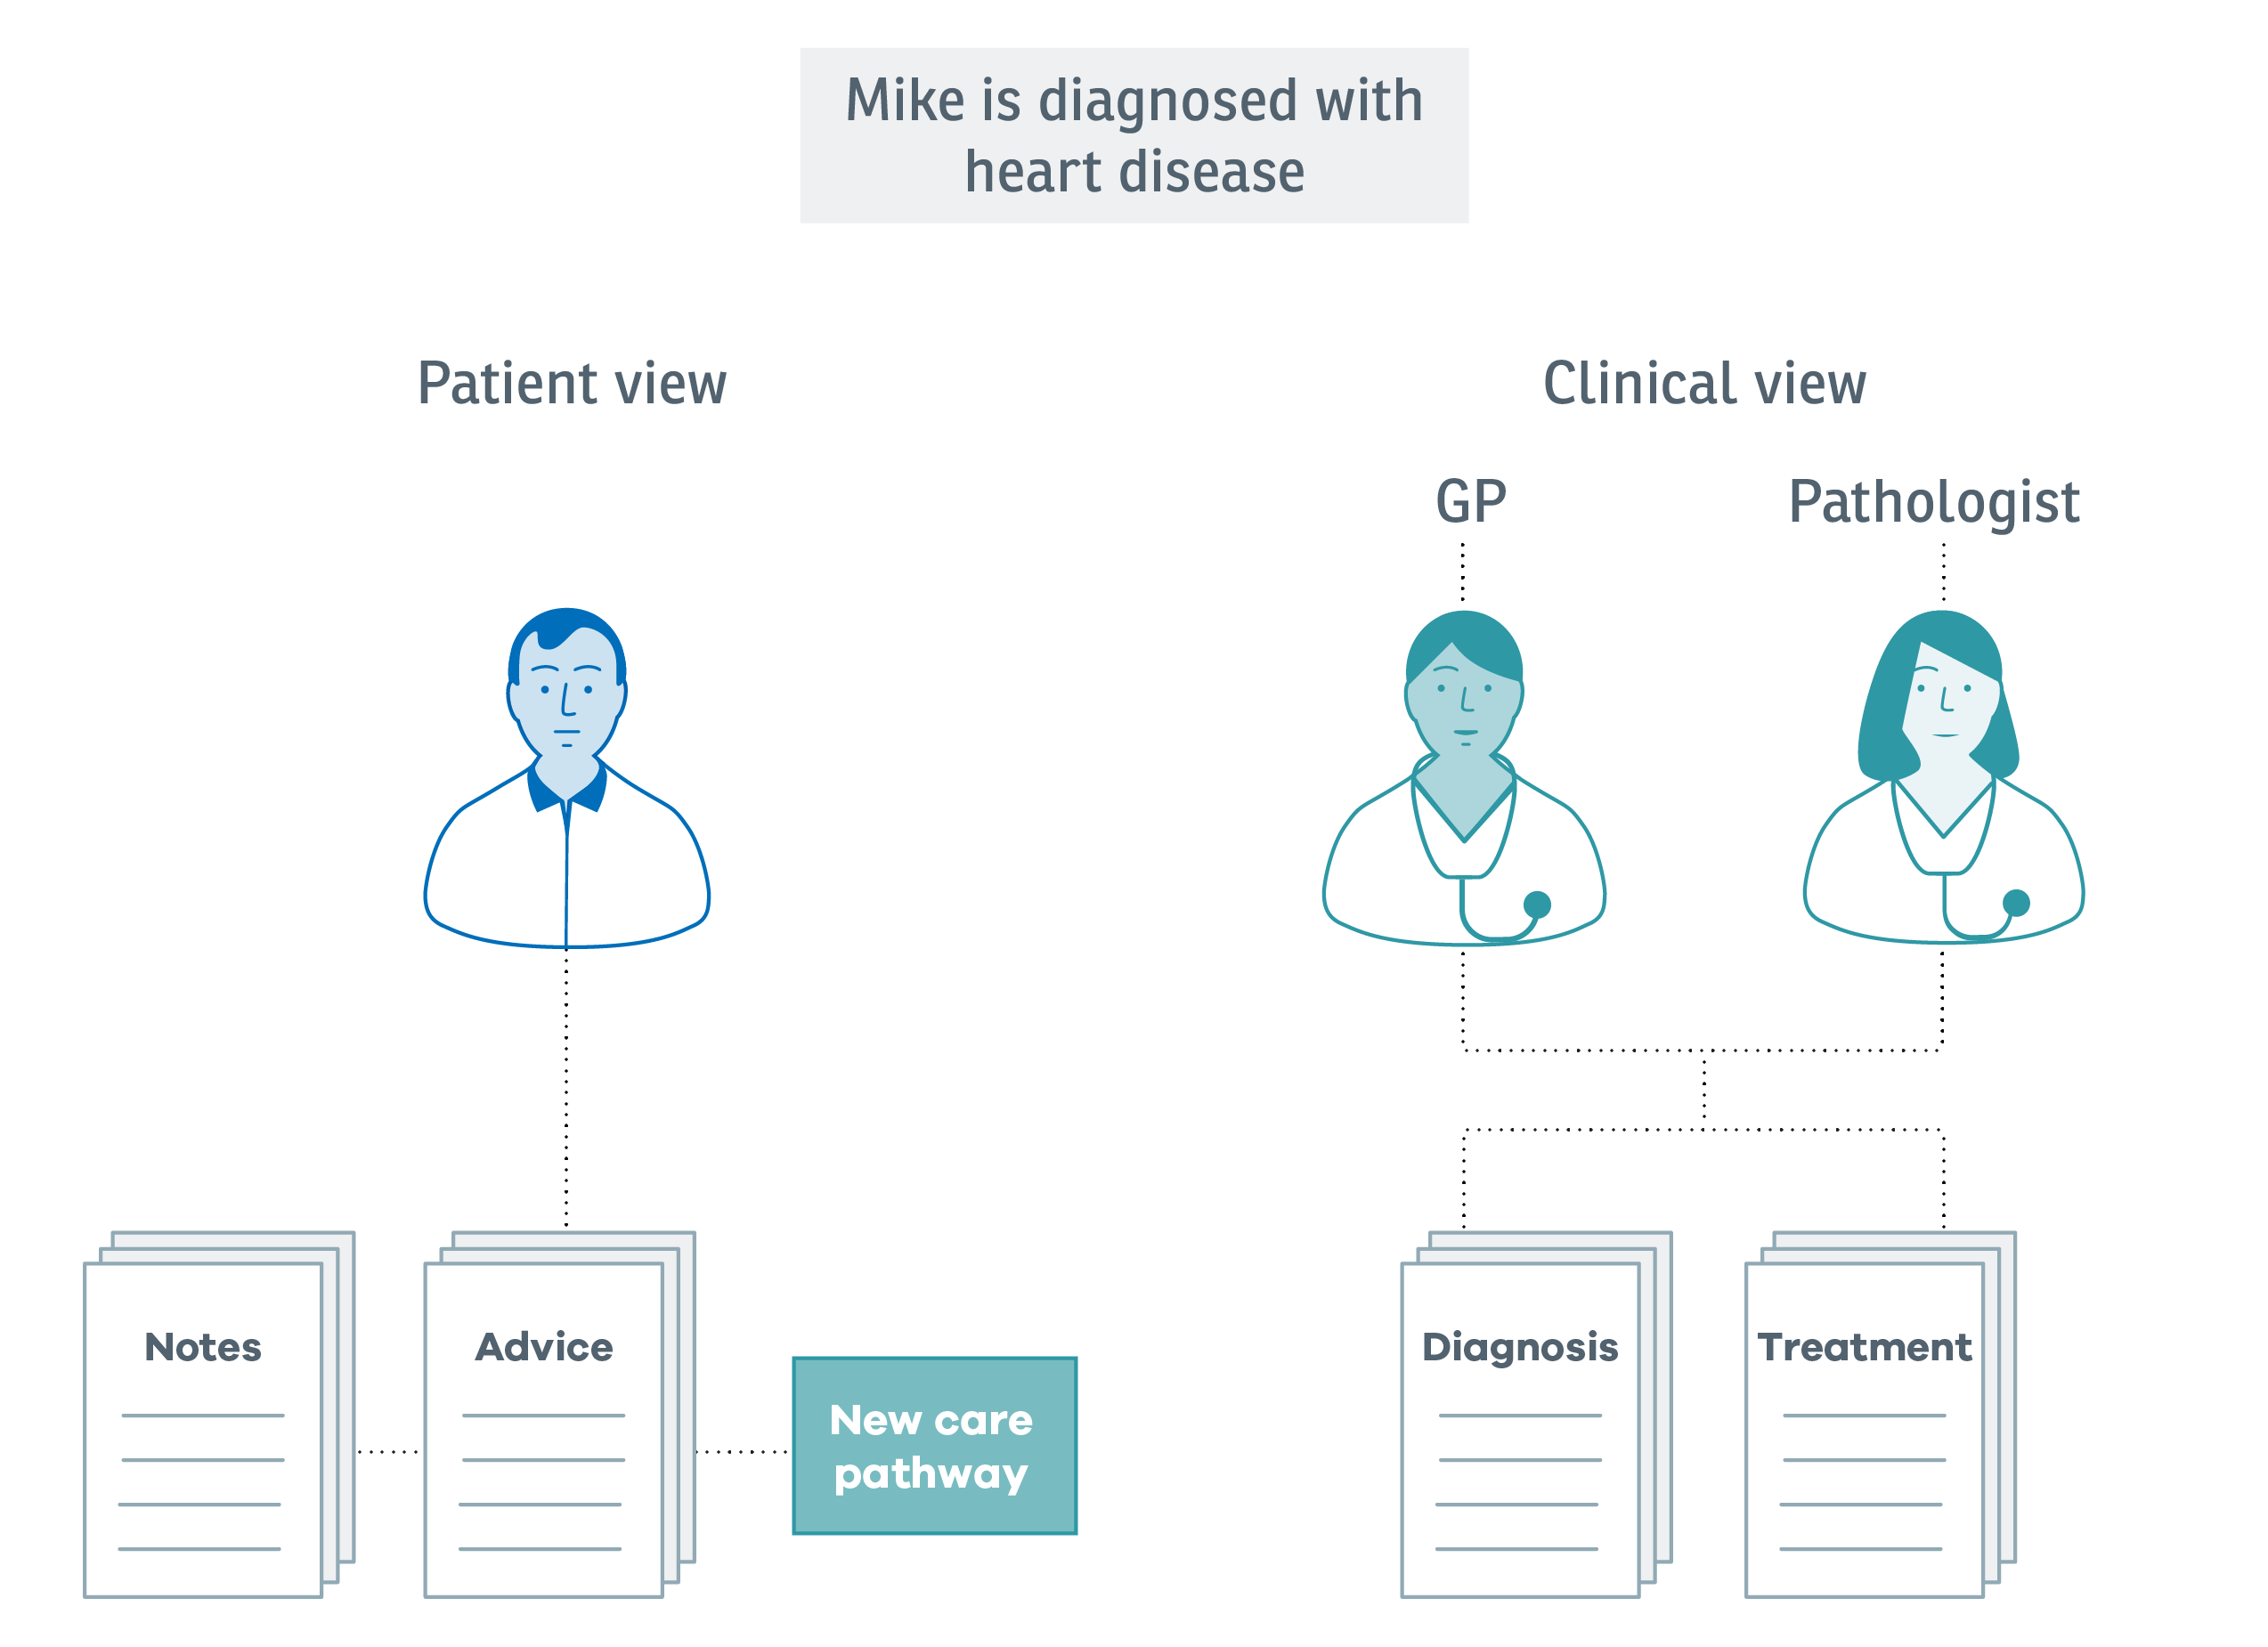 Experience map: Mike’s first diagnosis. A diagram showing the information and advice available to Mike and the treatment he receives as he is given his first diagnosis